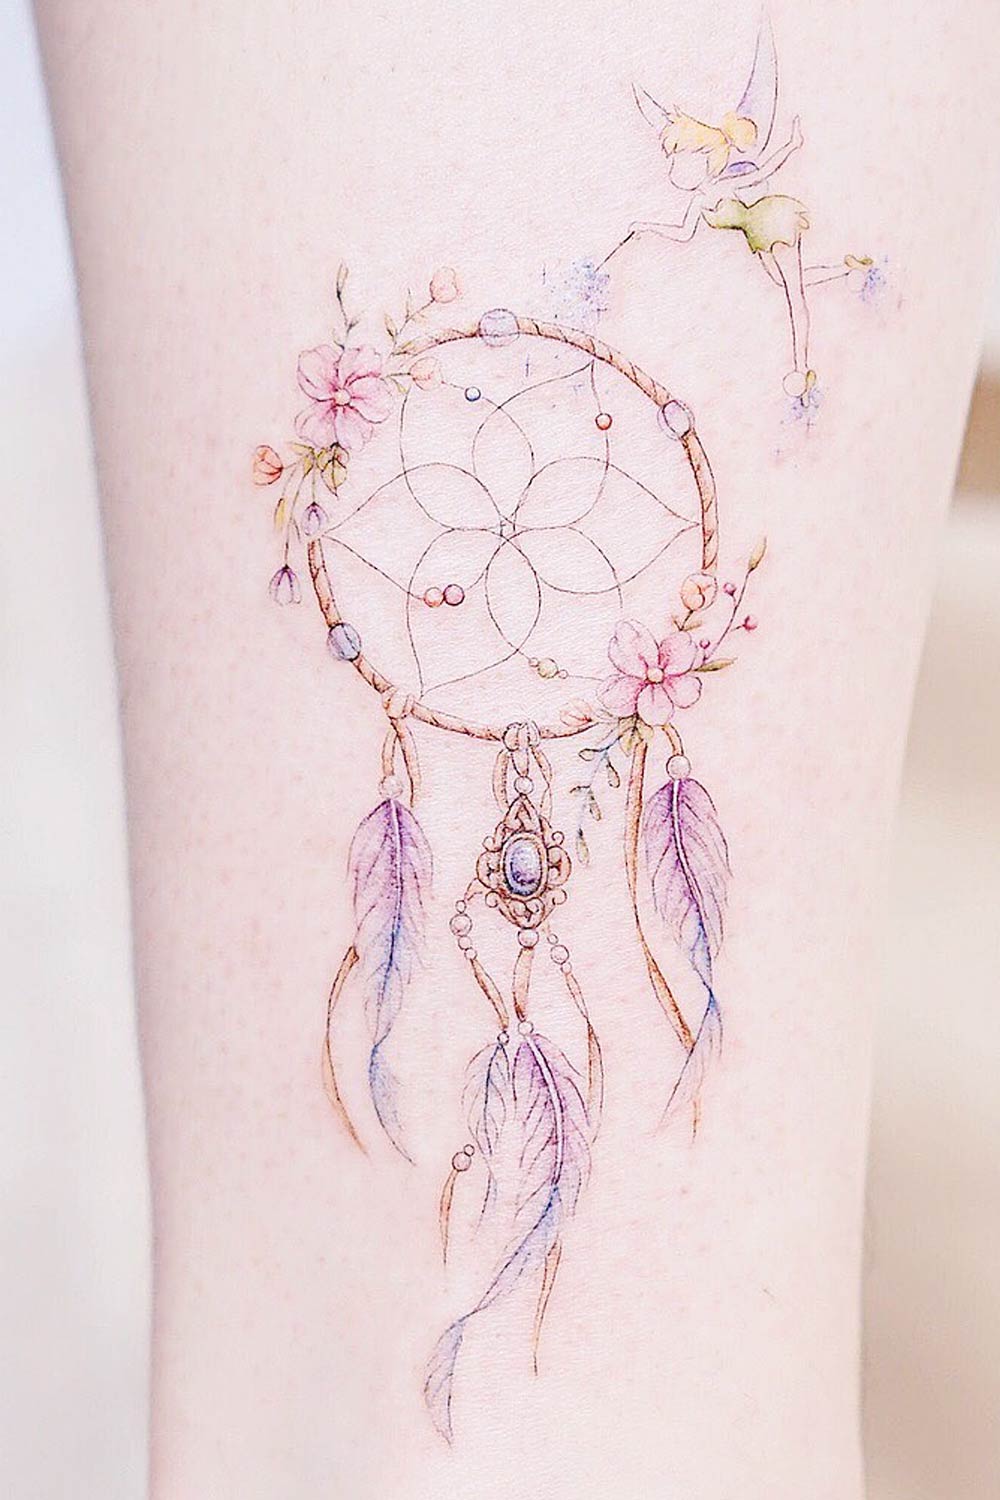 Meaning and Symbolism of Dream Catcher Tattoo